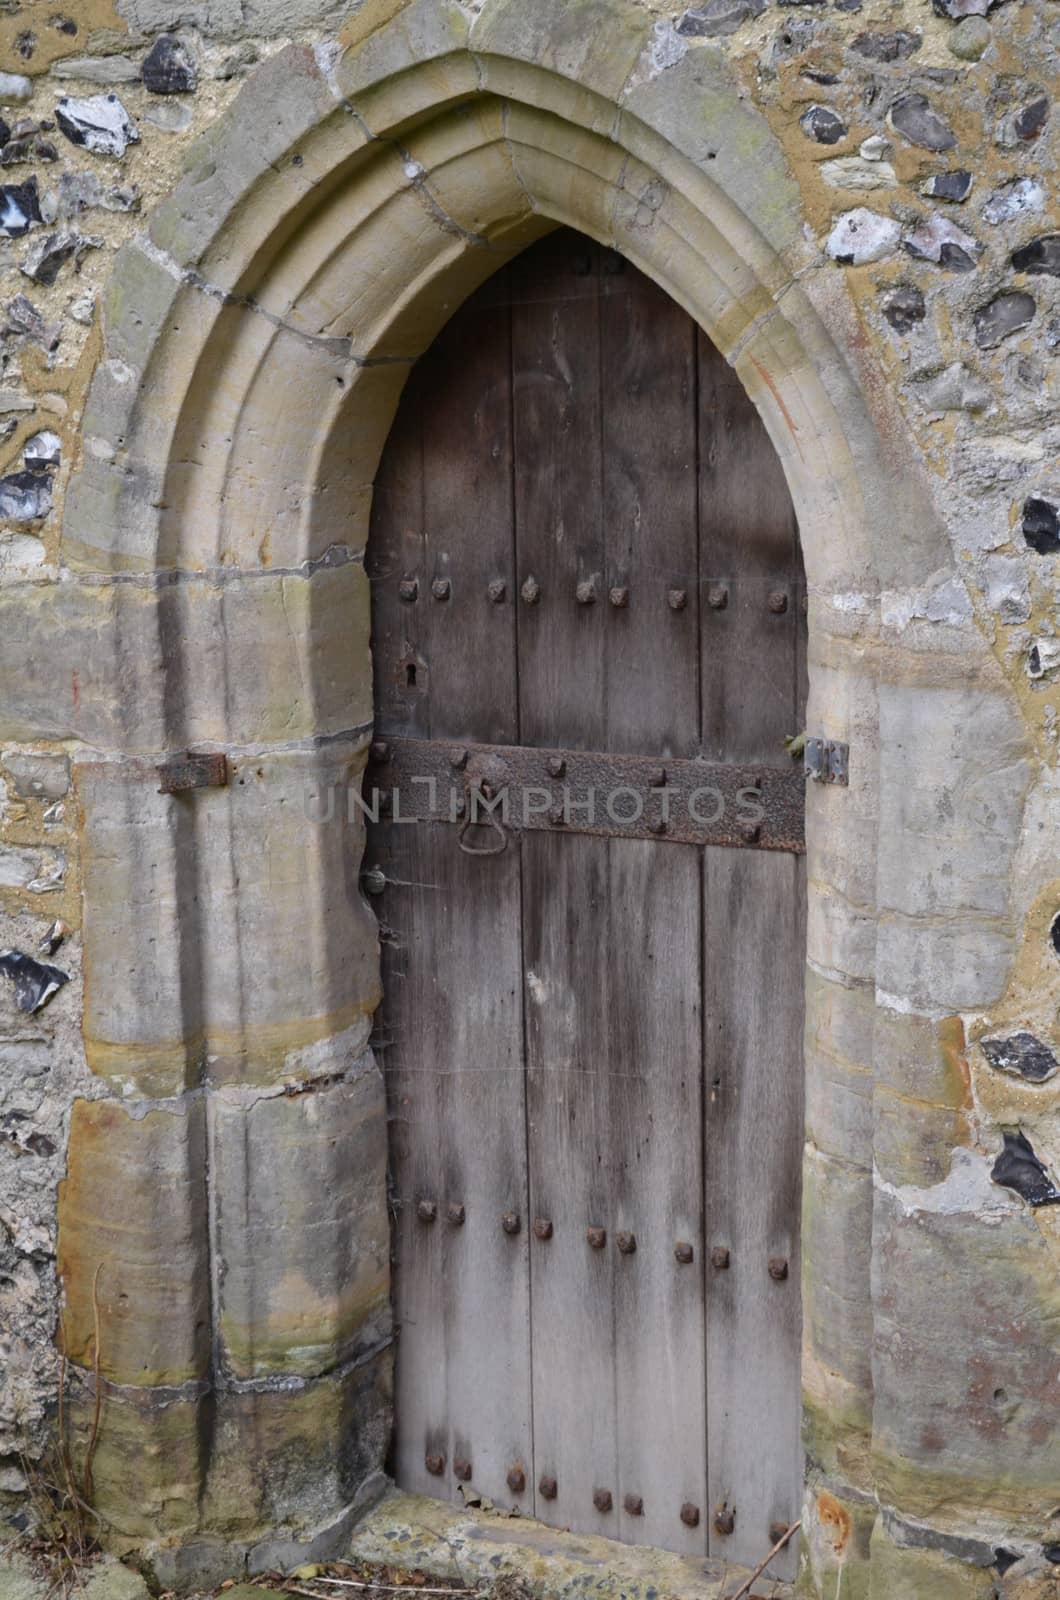 Ancient church doorway with solid oak wood door with stone frame and arch.Shot taken at St Andrews a 12th century late Norman style church at Edburton,Sussex,England.